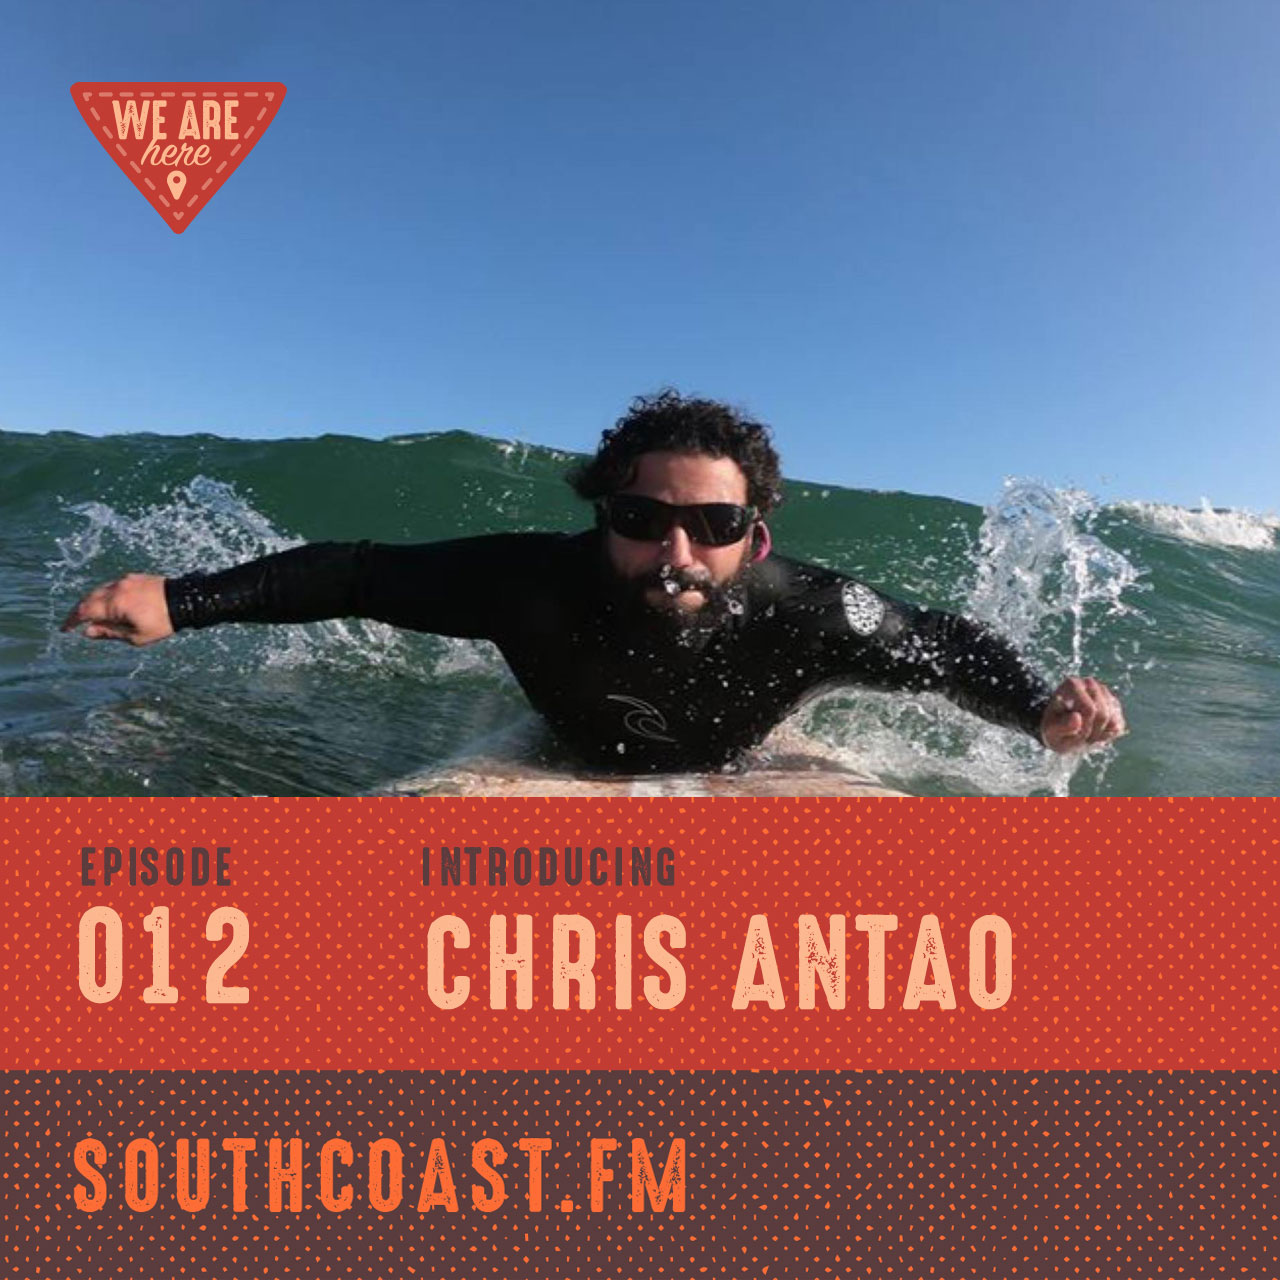 Chris Antao of Gnome Surf. Launching a non-profit on the South Coast